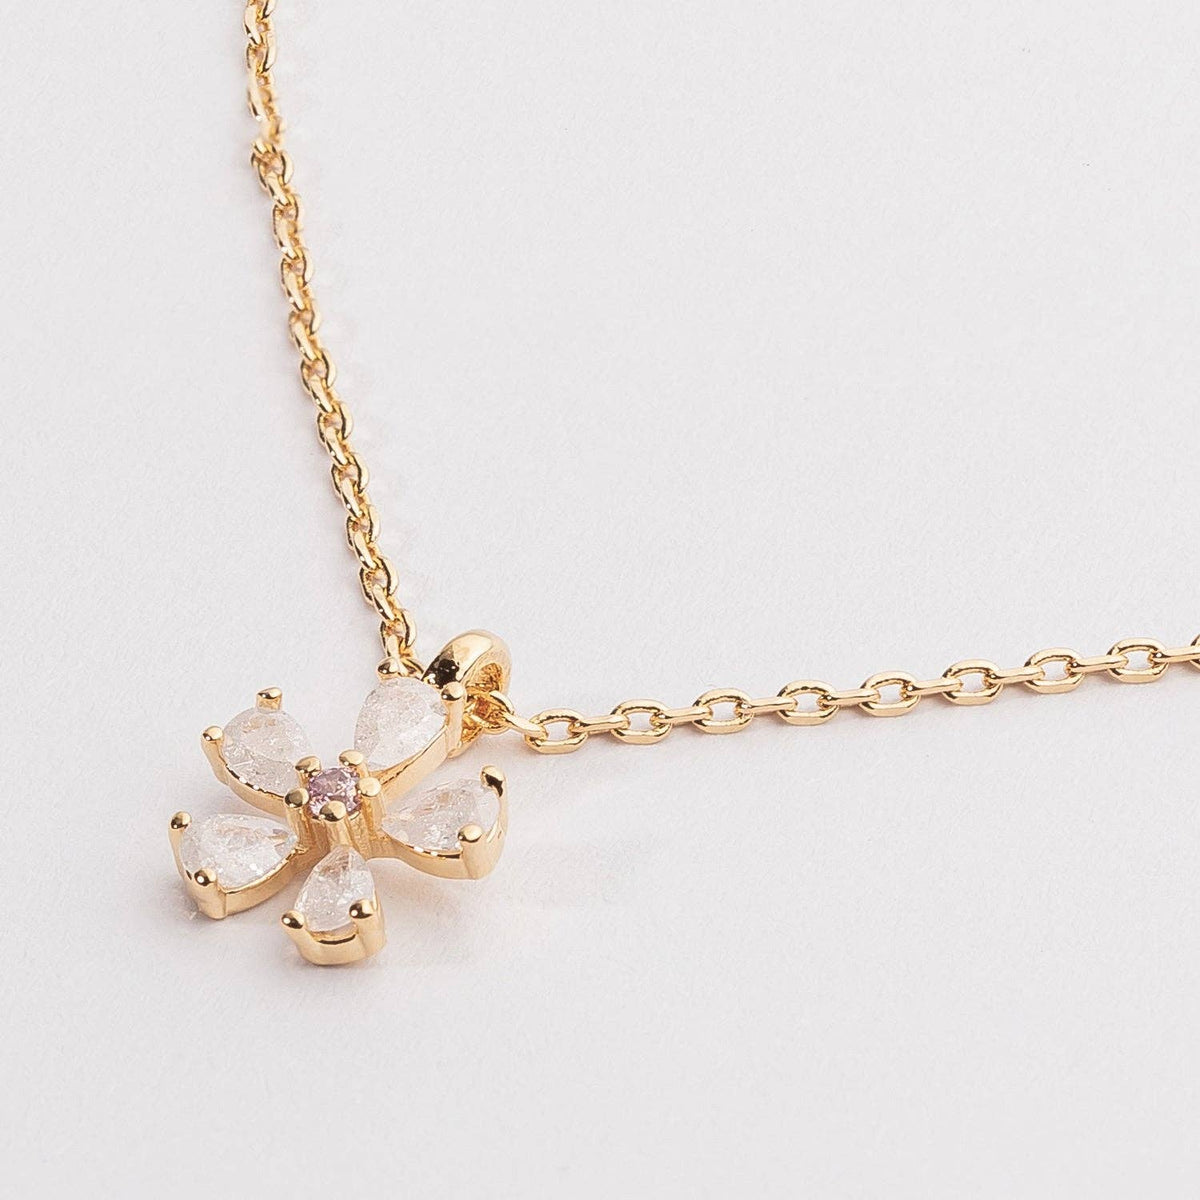 18K Gold Dipped Necklace with Flower Pendant